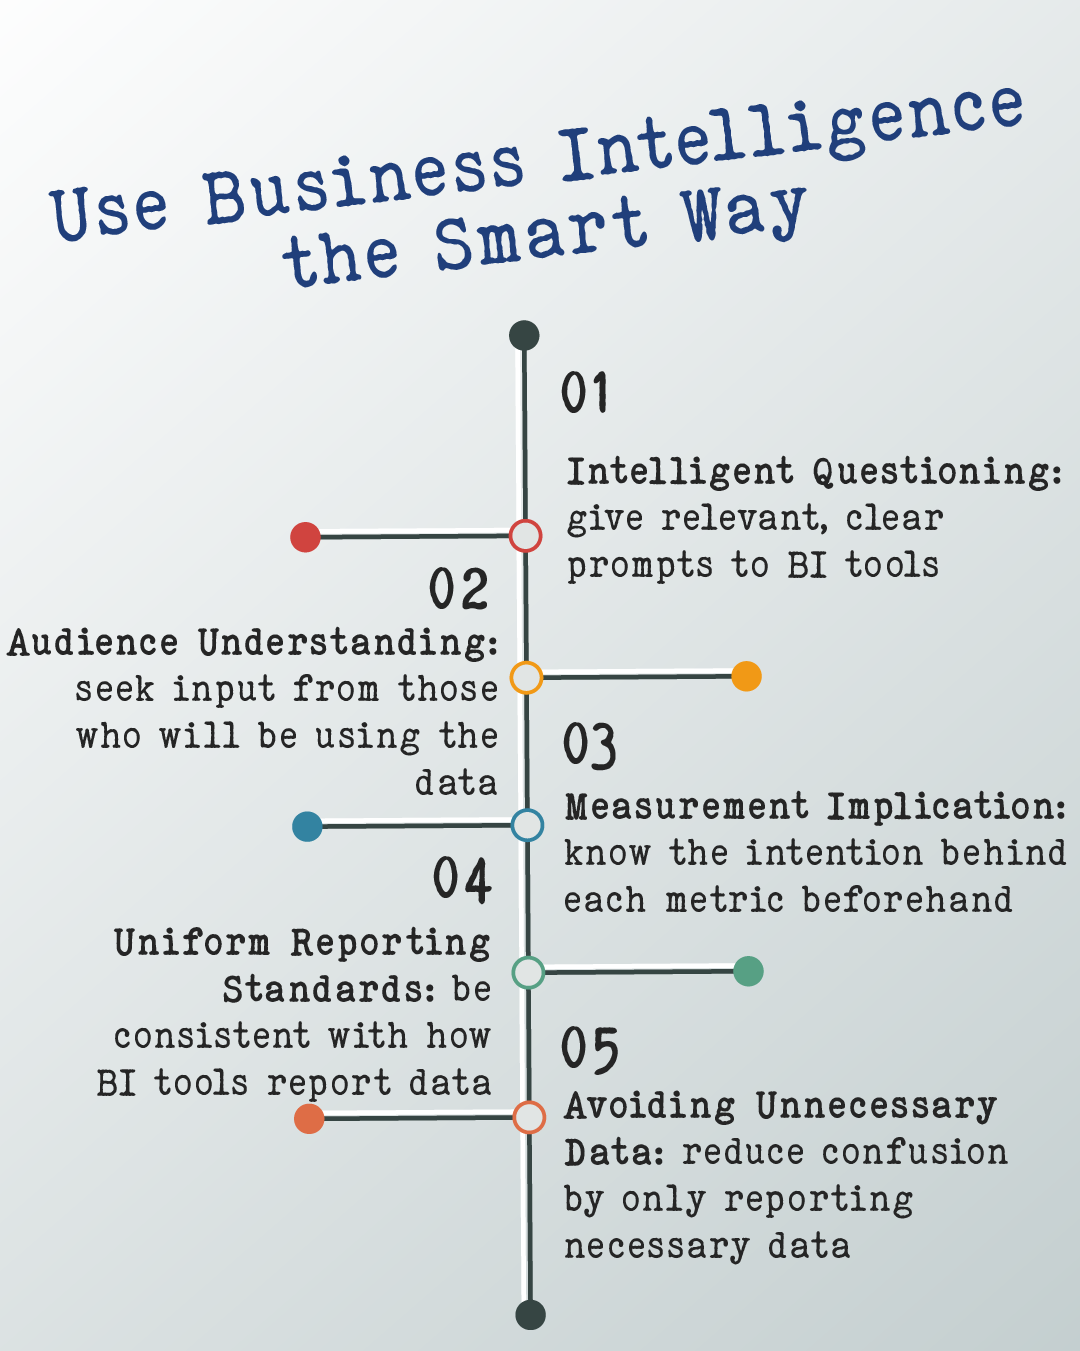 Smart Business Intelligence Practices